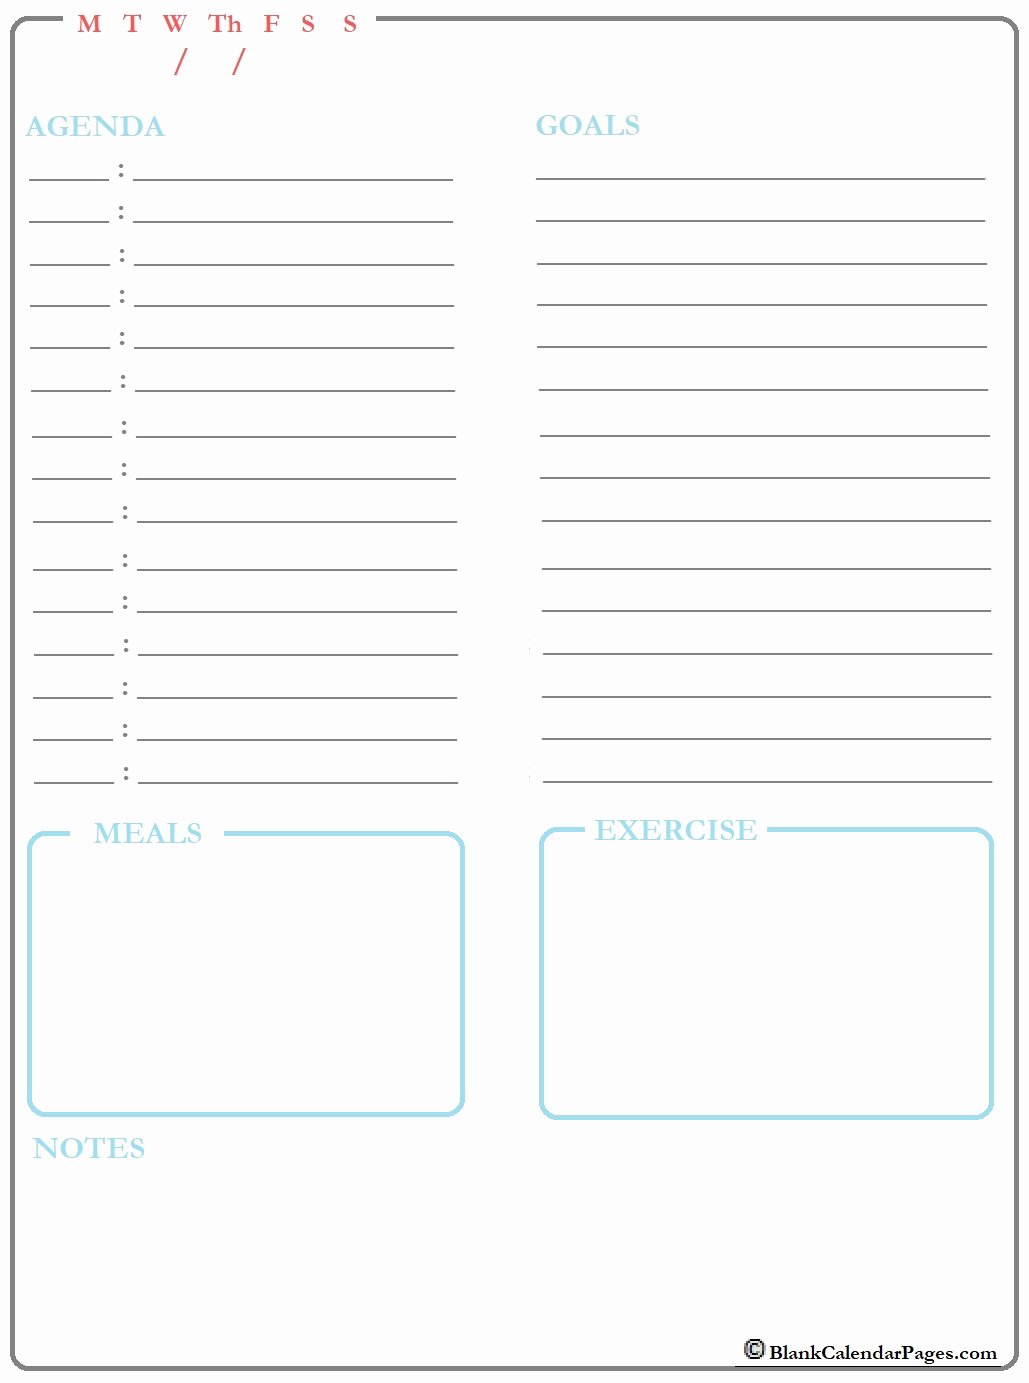 Printable Daily Calendar Pages New October 2019 Daily Calendar Template October 2019 Daily